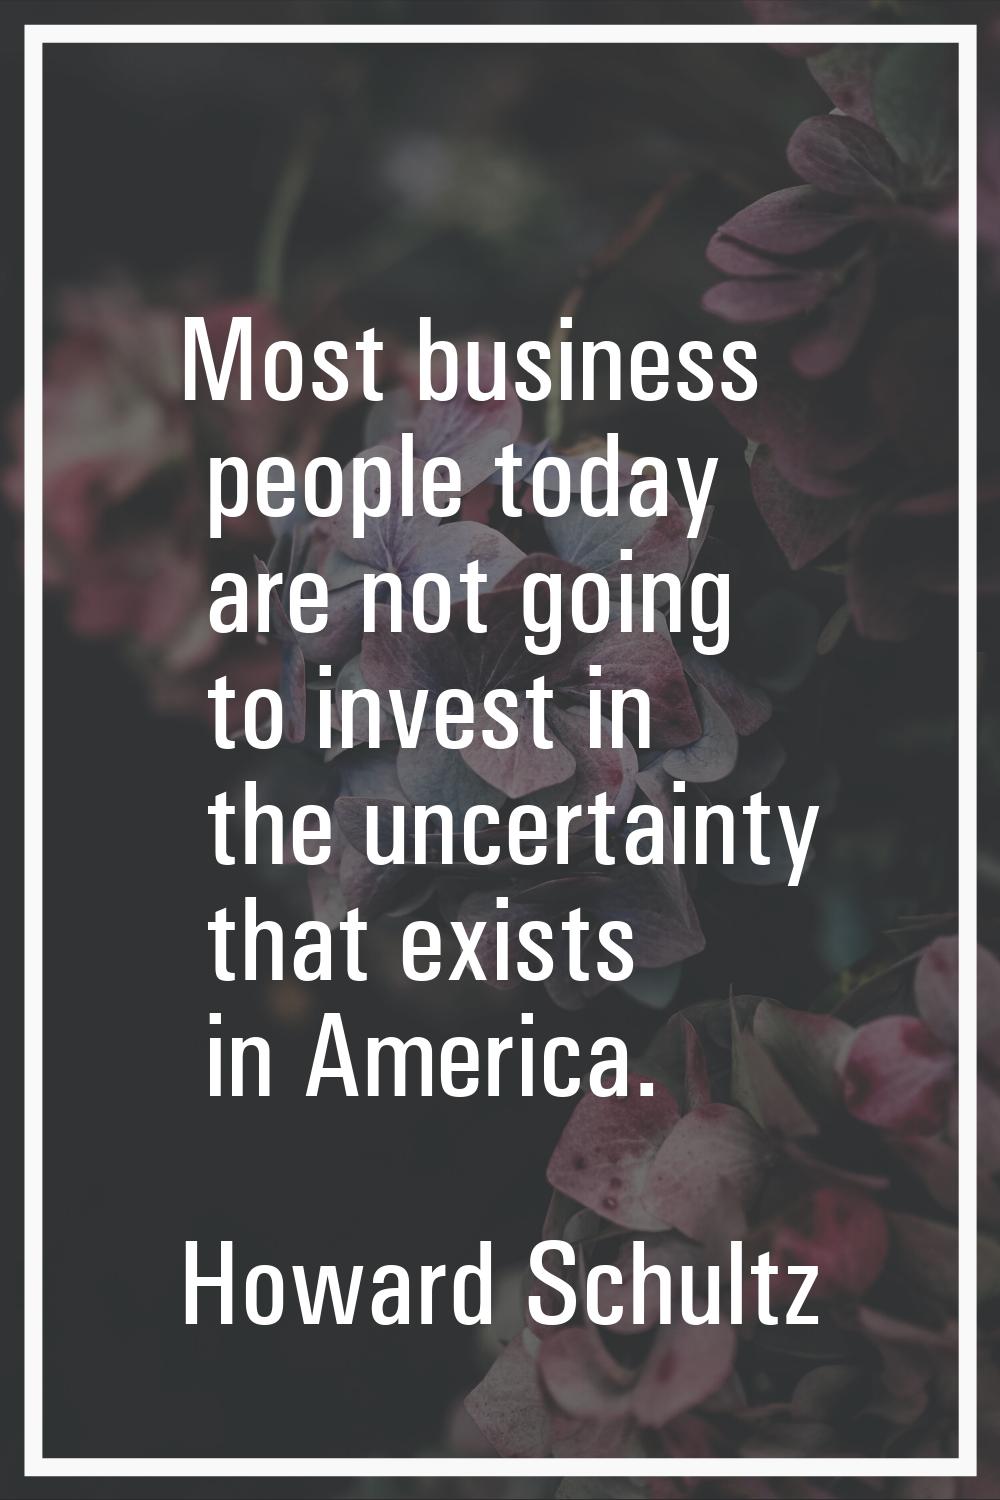 Most business people today are not going to invest in the uncertainty that exists in America.